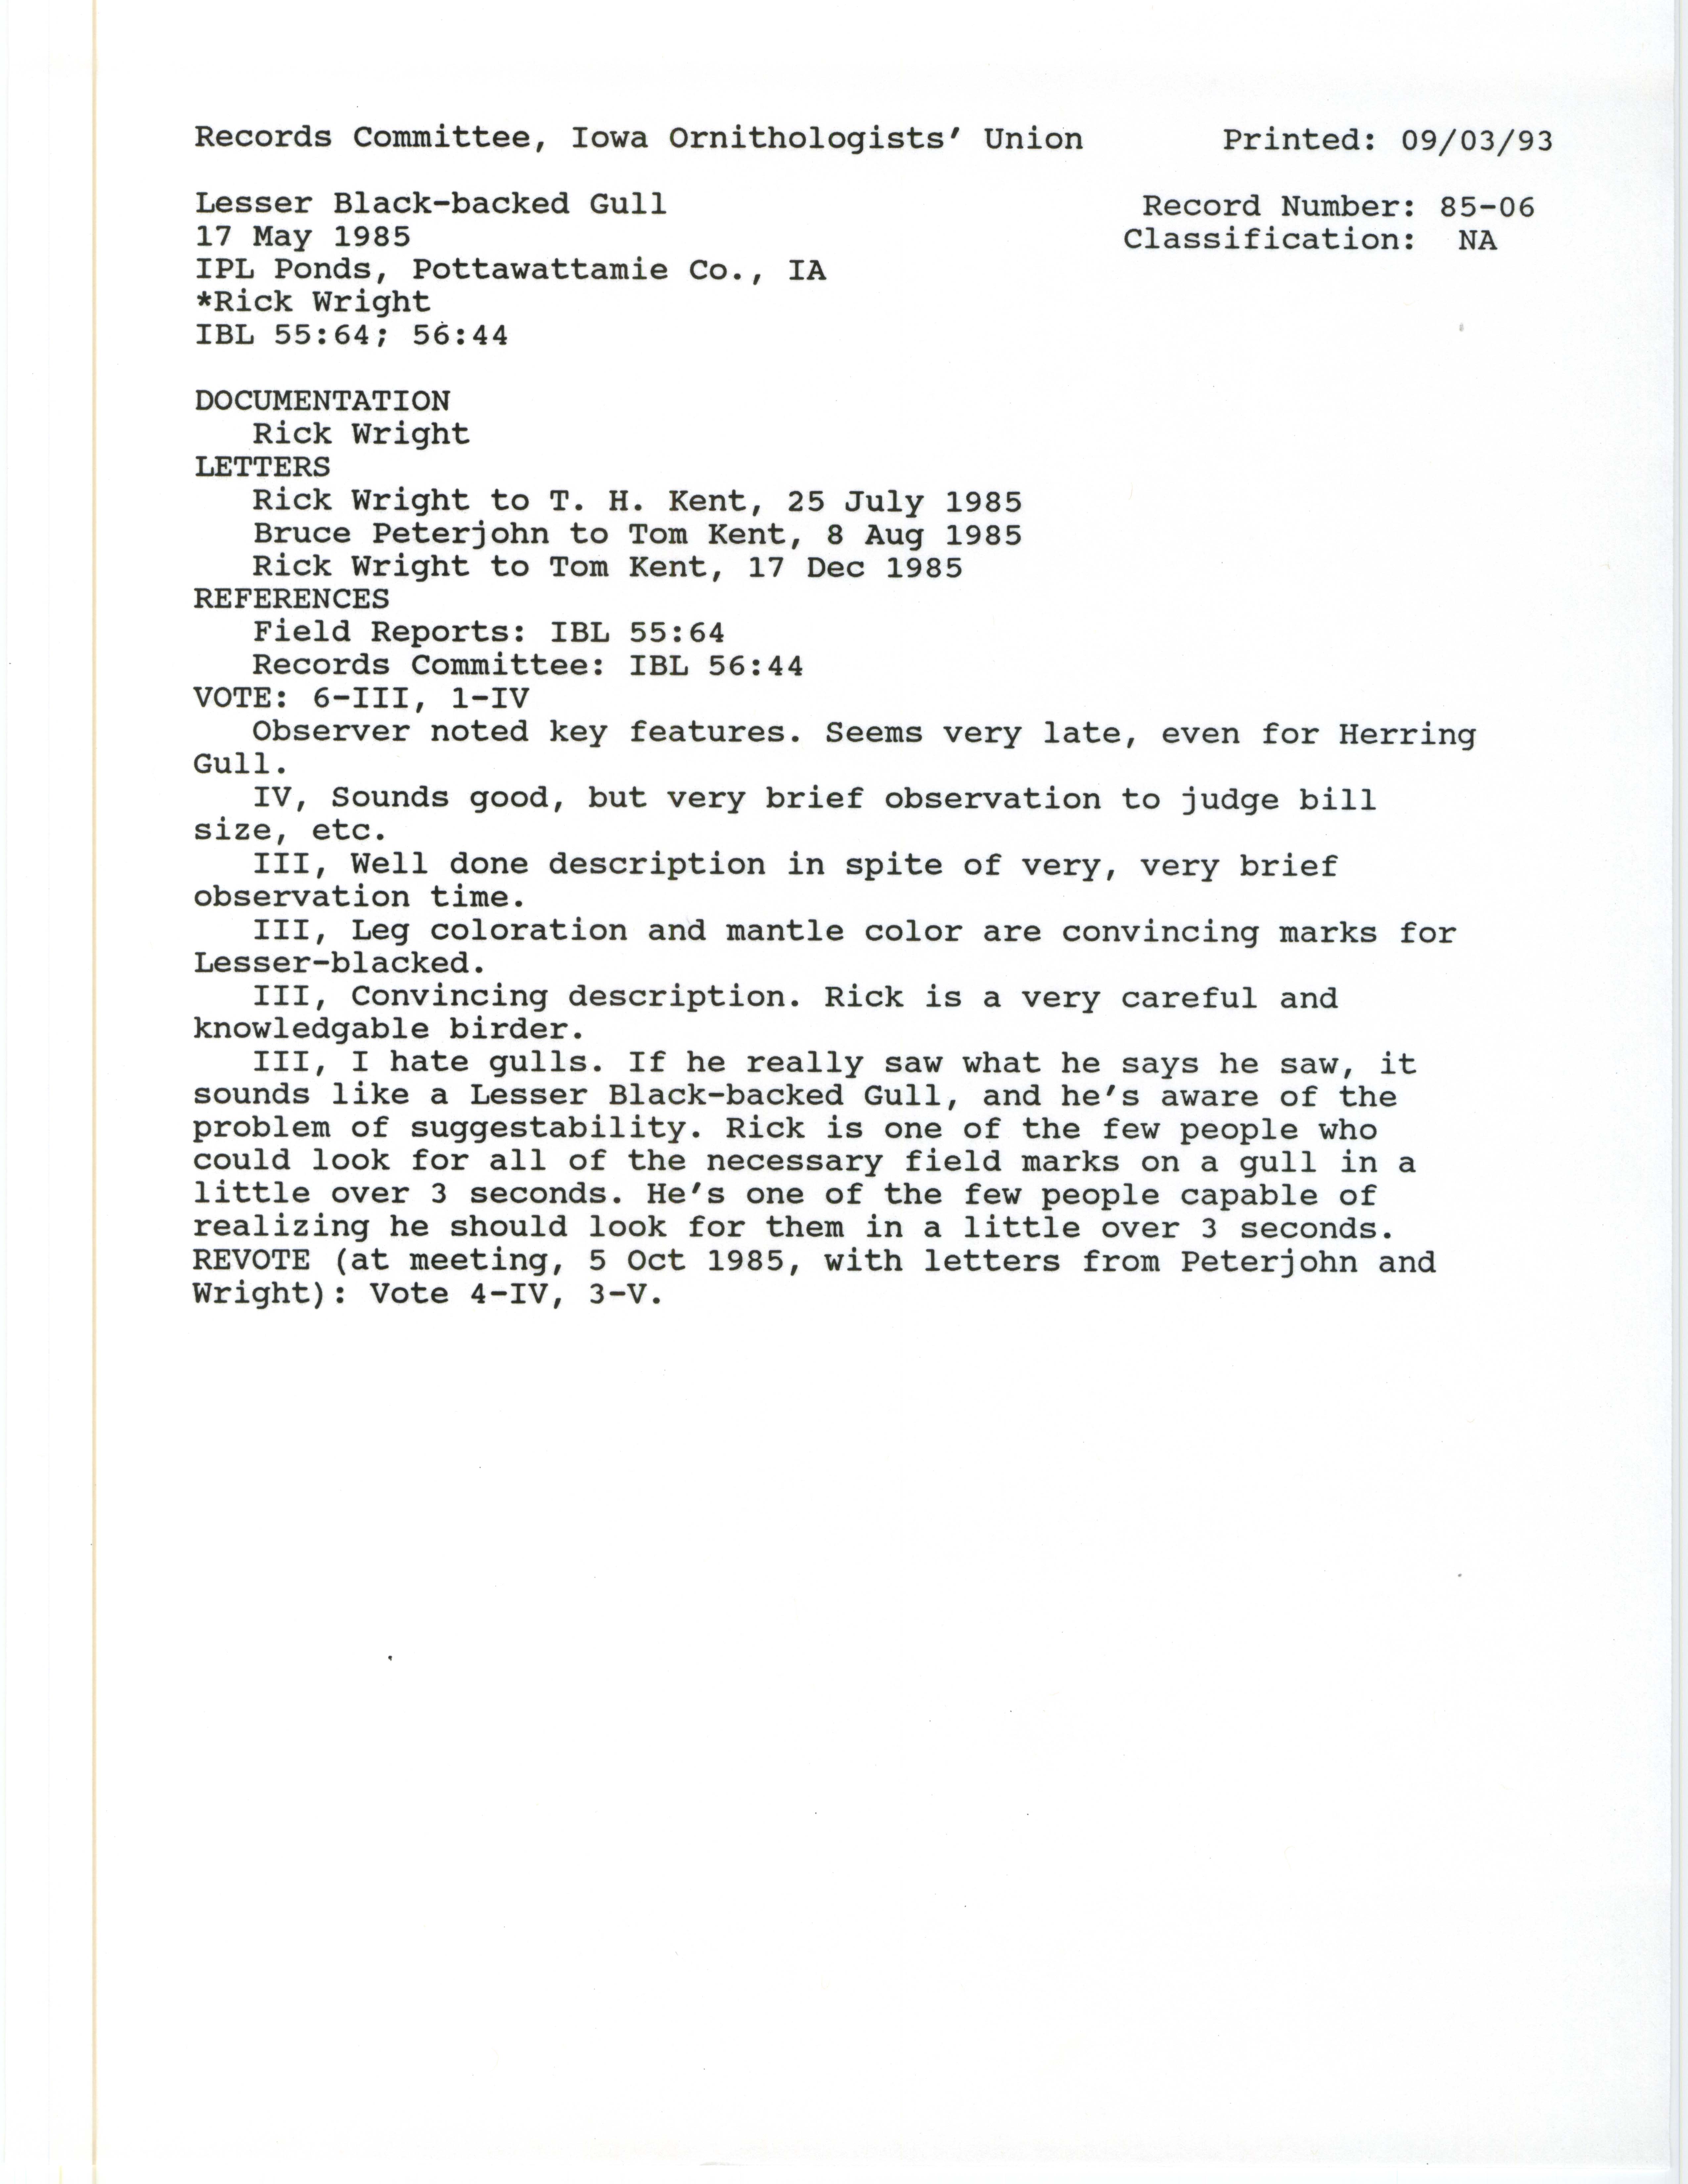 Records Committee review for rare bird sighting of Lesser Black-backed Gull at IPL Ponds, 1985